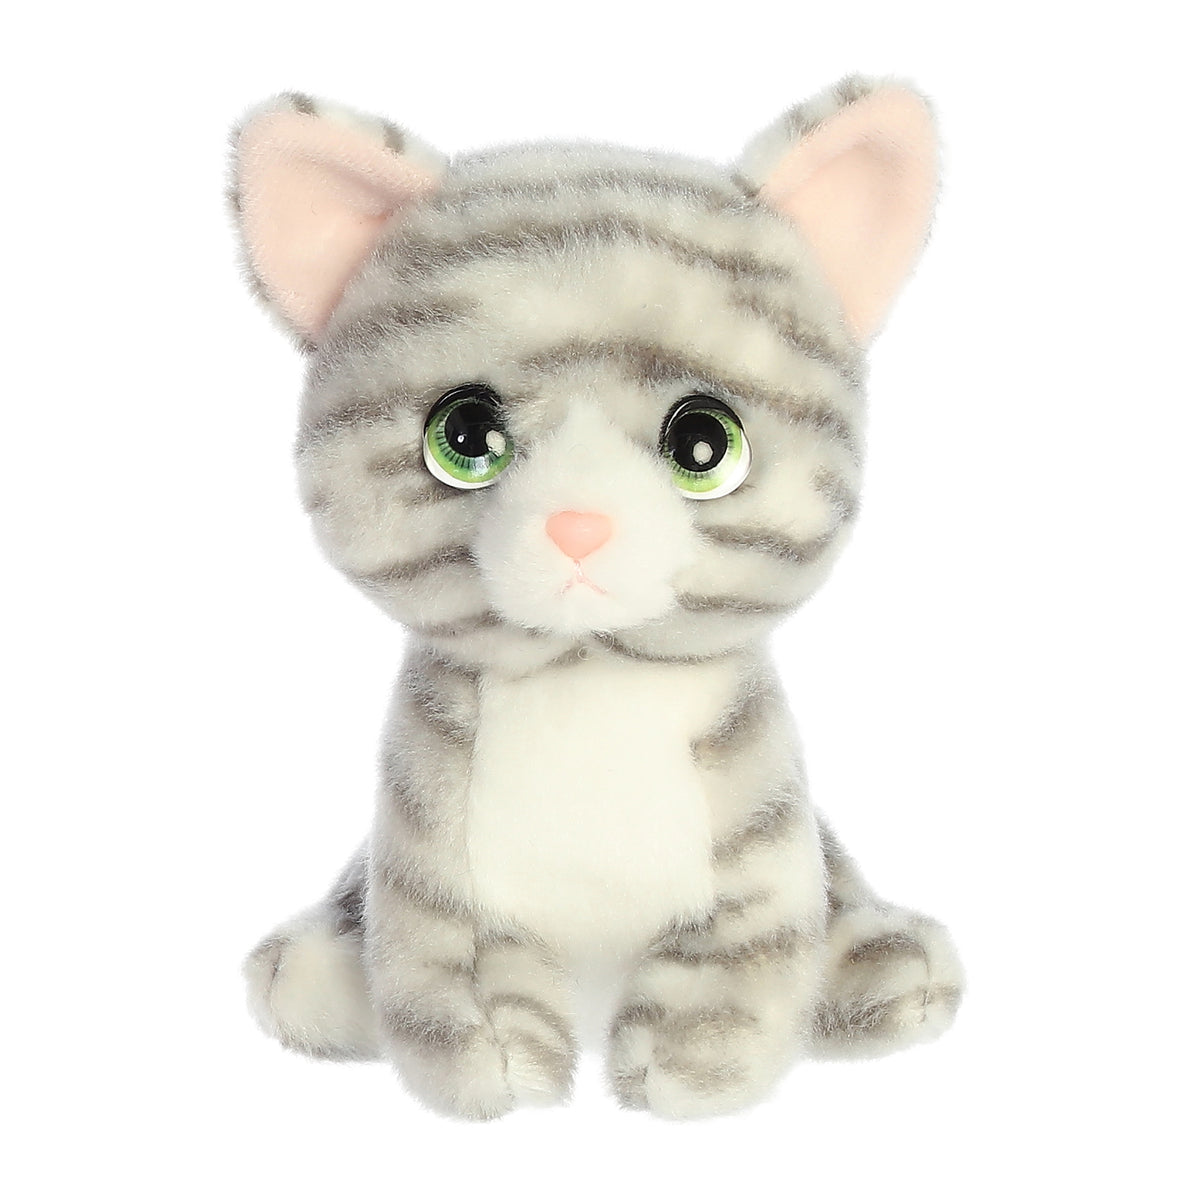 Misty Gray Tabby cat plush with soft coat and dancing stripes, twinkling eyes, part of the Petites collection by Aurora.